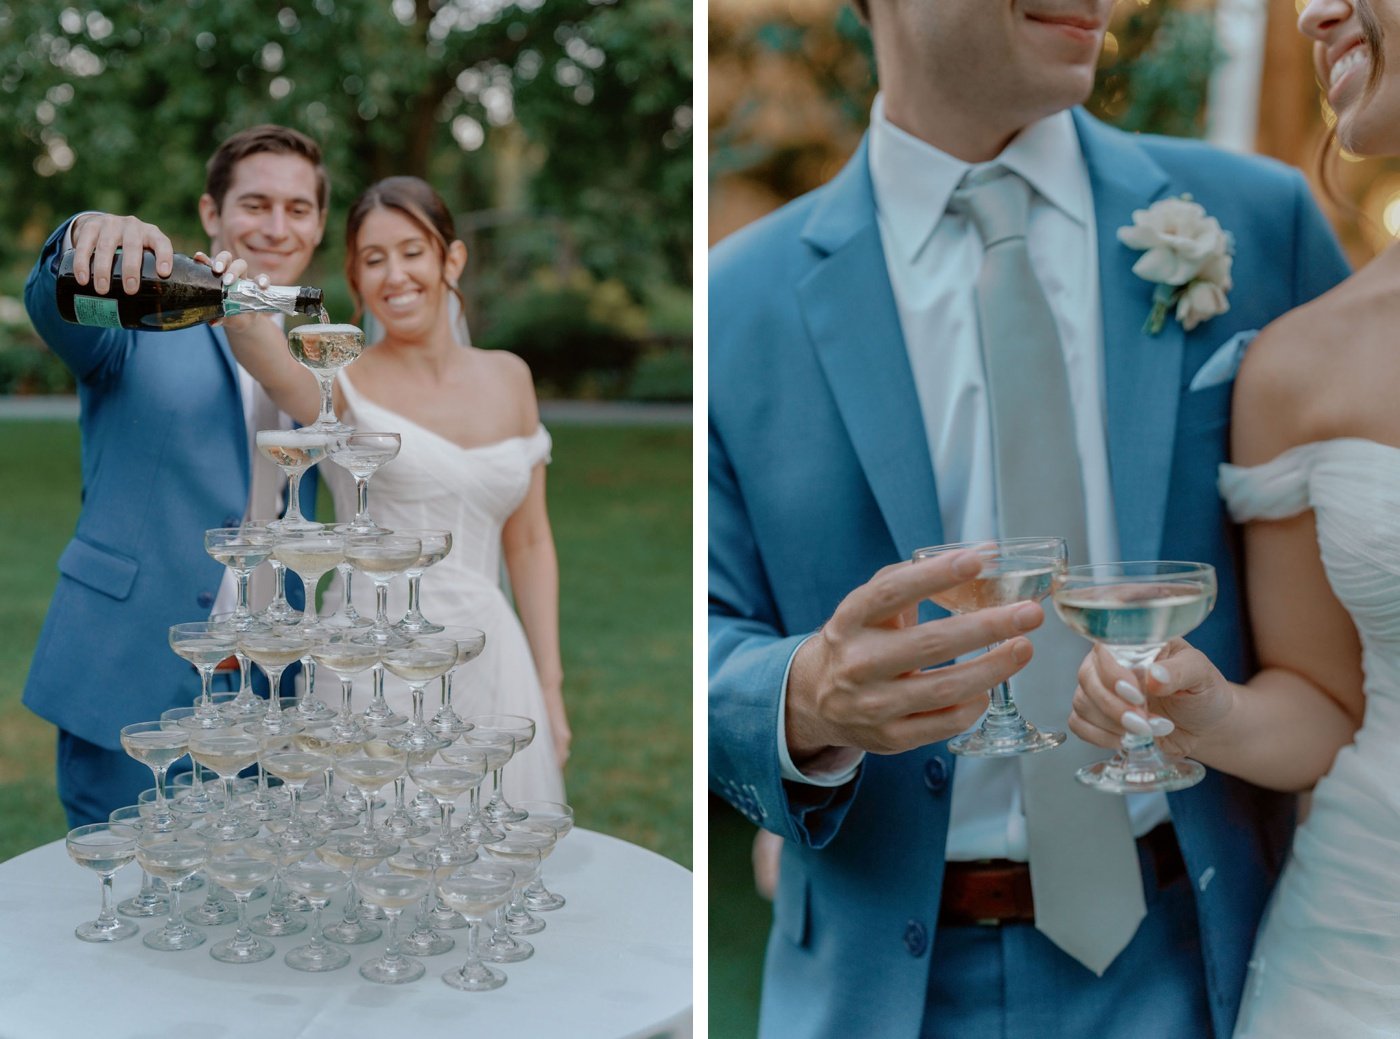 Newlyweds filling a champagne tower at an outdoor wedding reception